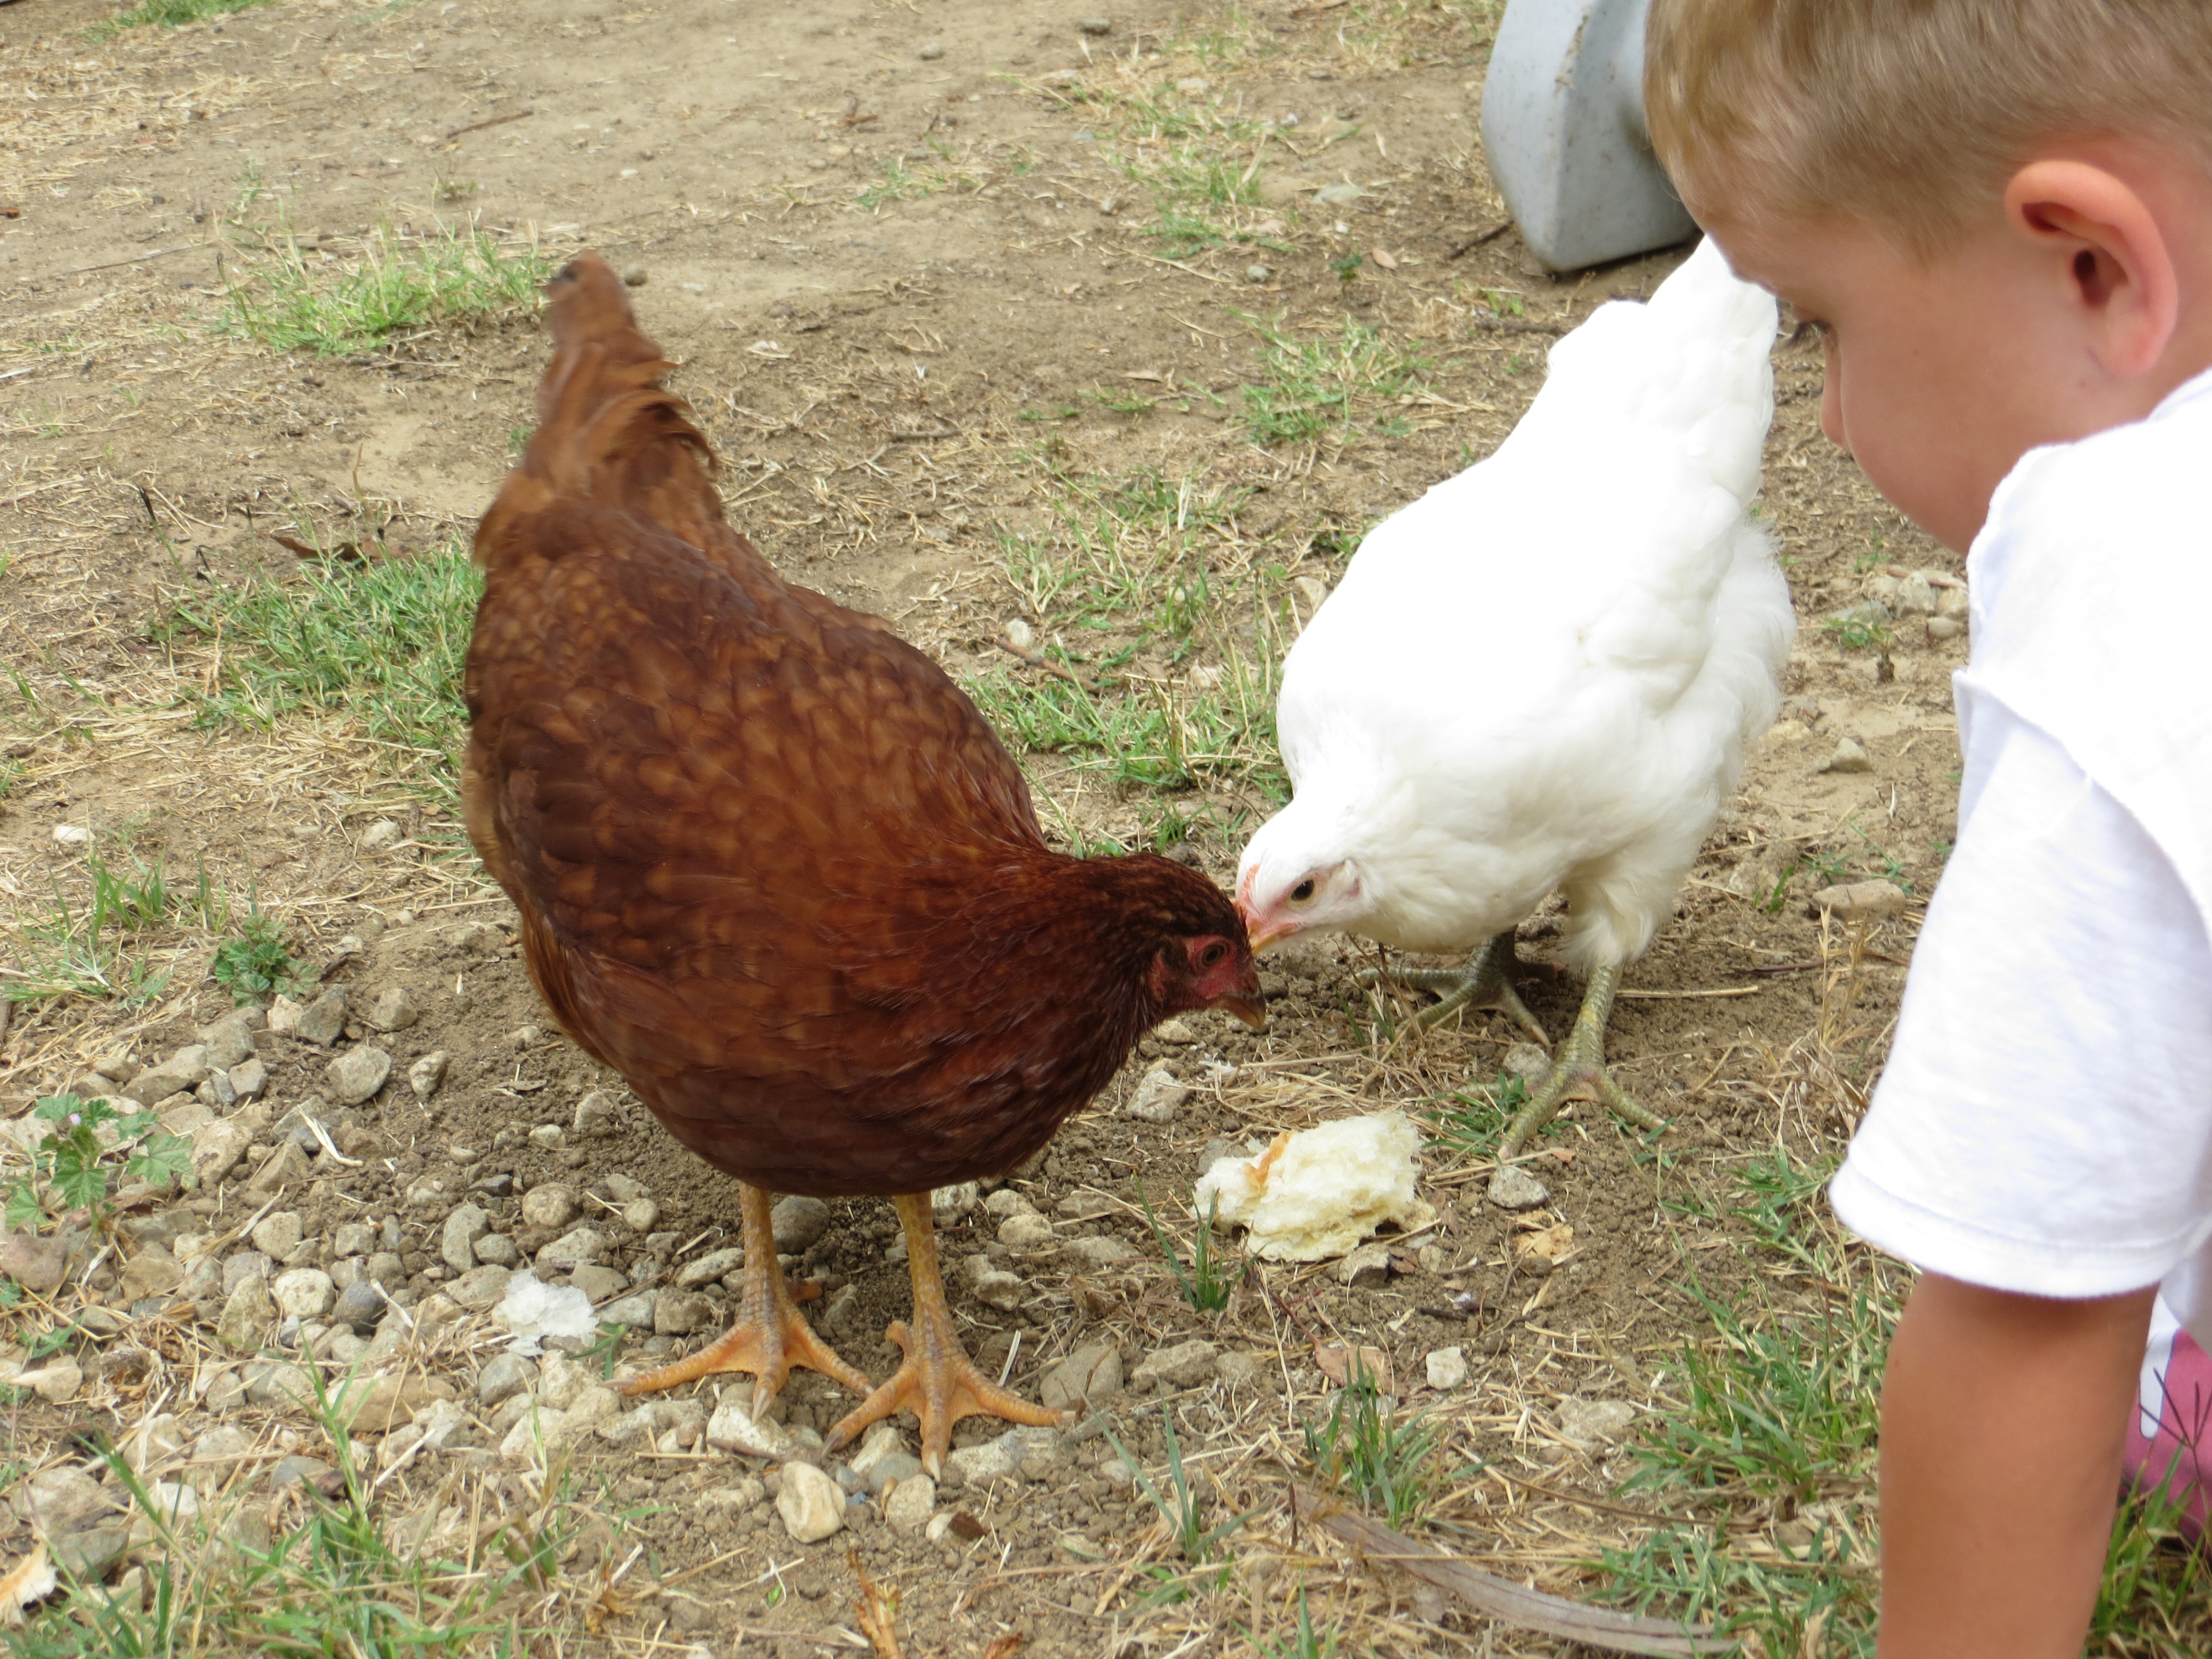 RIR is the most chicken--she is terrified of us. The White Jersey Giant has beautiful eyes.